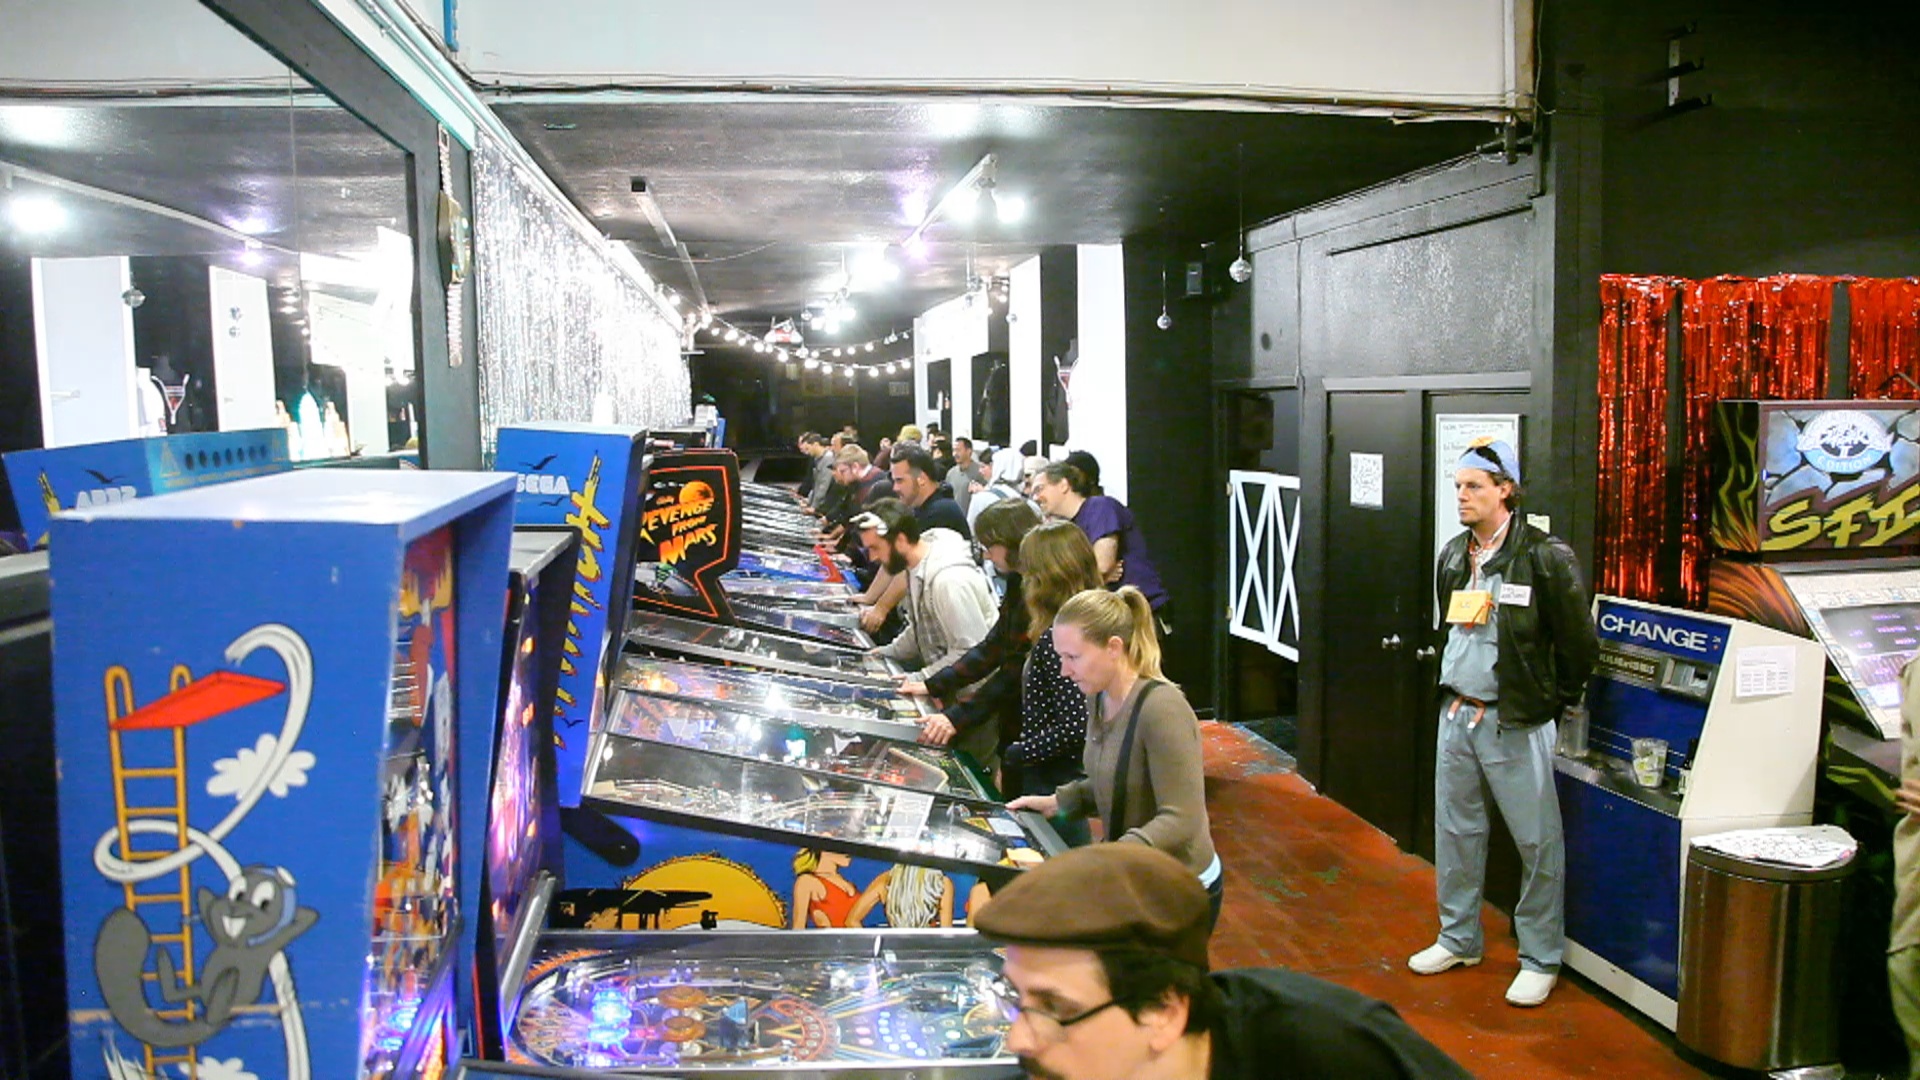 a group of people playing pinball games in an arcade